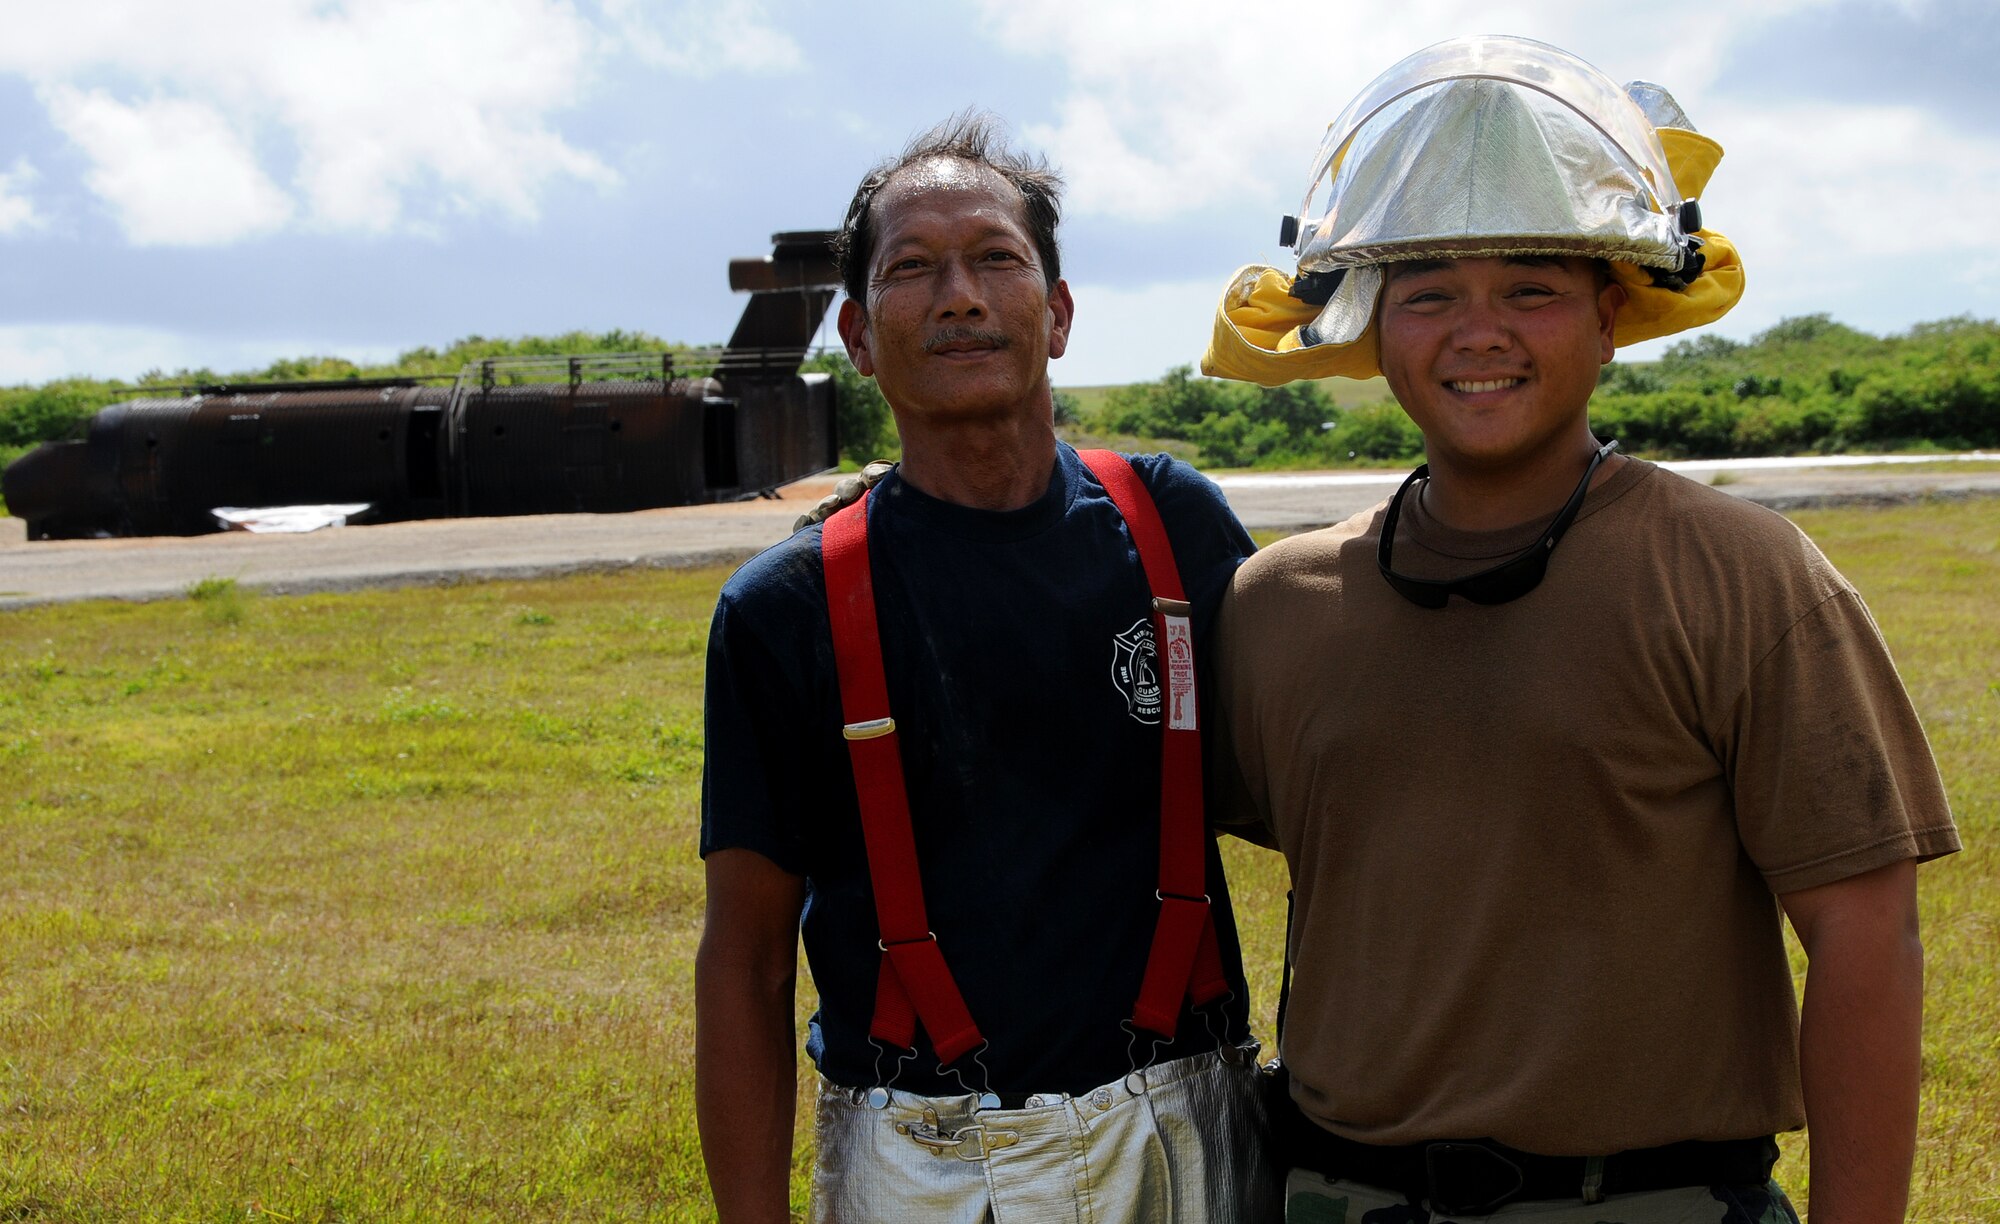 ANDERSEN AIR FORCE BASE, Guam - Father-son duo John R. Ballesta from the Won Pat International Airport Fire Department and John Robert Ballesta from Andersen's Fire and Emergency Services Flight train together during a joint training mission with fire departments from the Department of Defense, Government of Guam and the international airport here Jan. 22. John R. Ballesta, the father, has been a firefighter for more than 20 years. He first joined in 1988 with the Navy Federal Fire Department. After the Navy Federal Fire Department closed 28 men, including himself, transferred to the Won Pat Fire Department. His son Staff Sgt. John Robert Ballesta is stationed here. (U.S. Air Force photo by Airman 1st Class Courtney Witt)